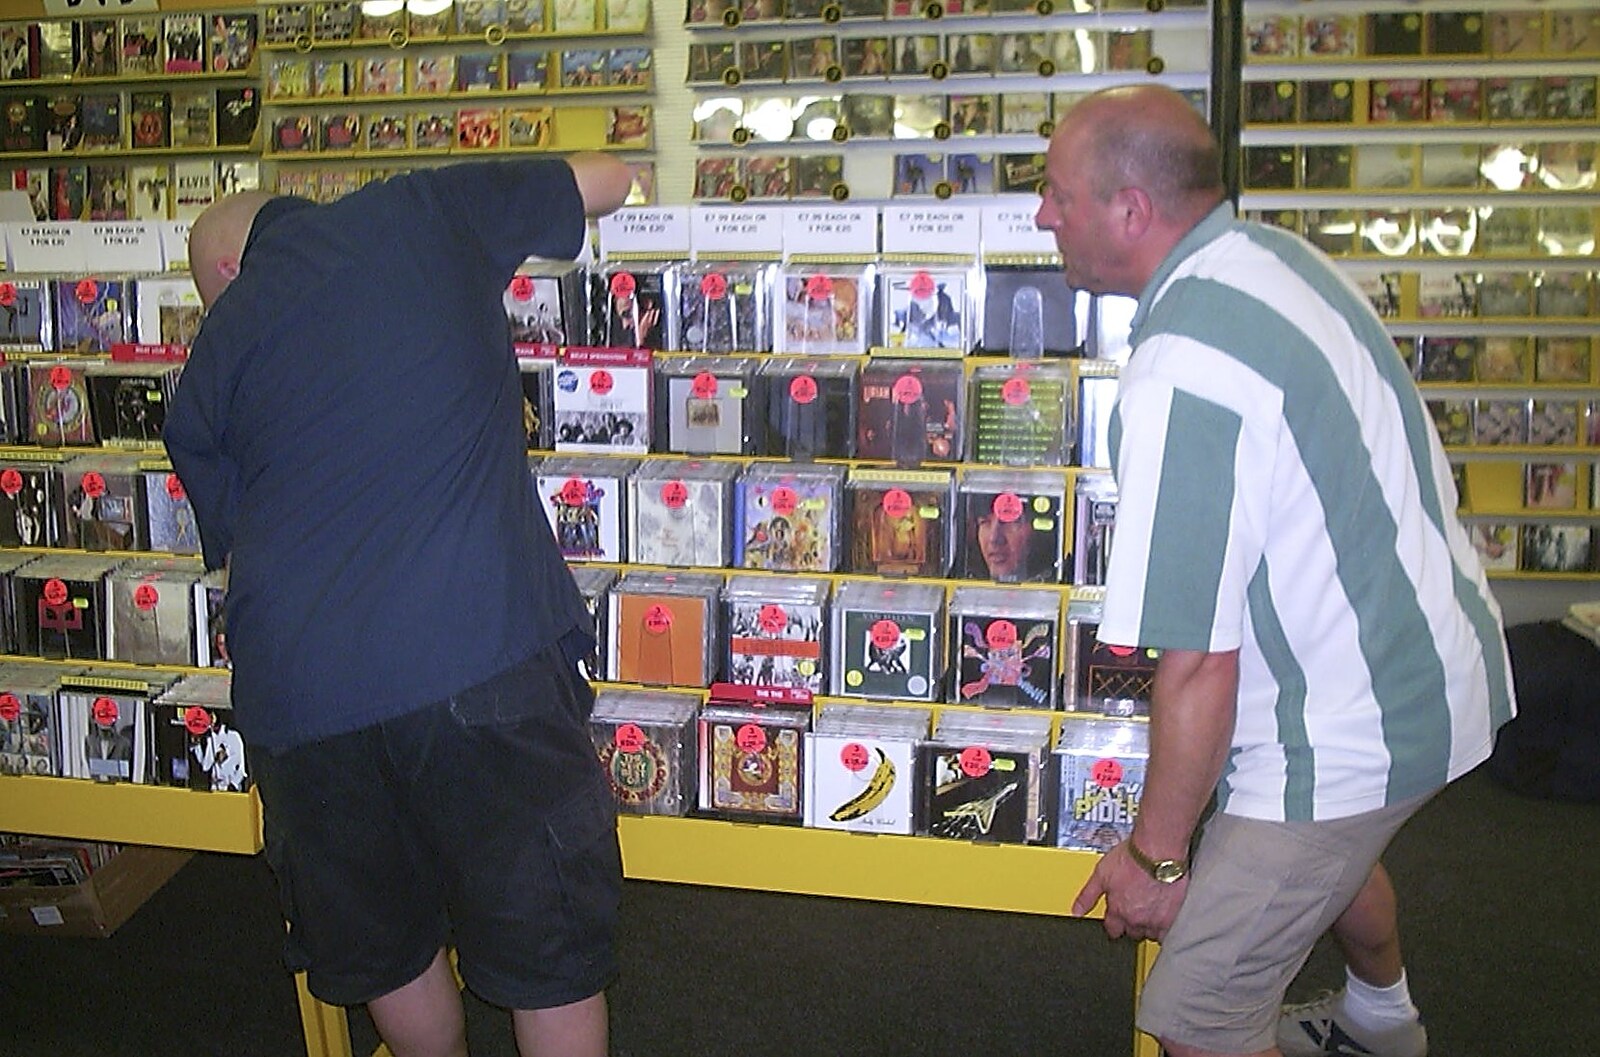 Mark Joseph at Revs, and the BSCC at Hoxne and Wortham - 30th September 2004: Mark and Wes move the CD shelves back